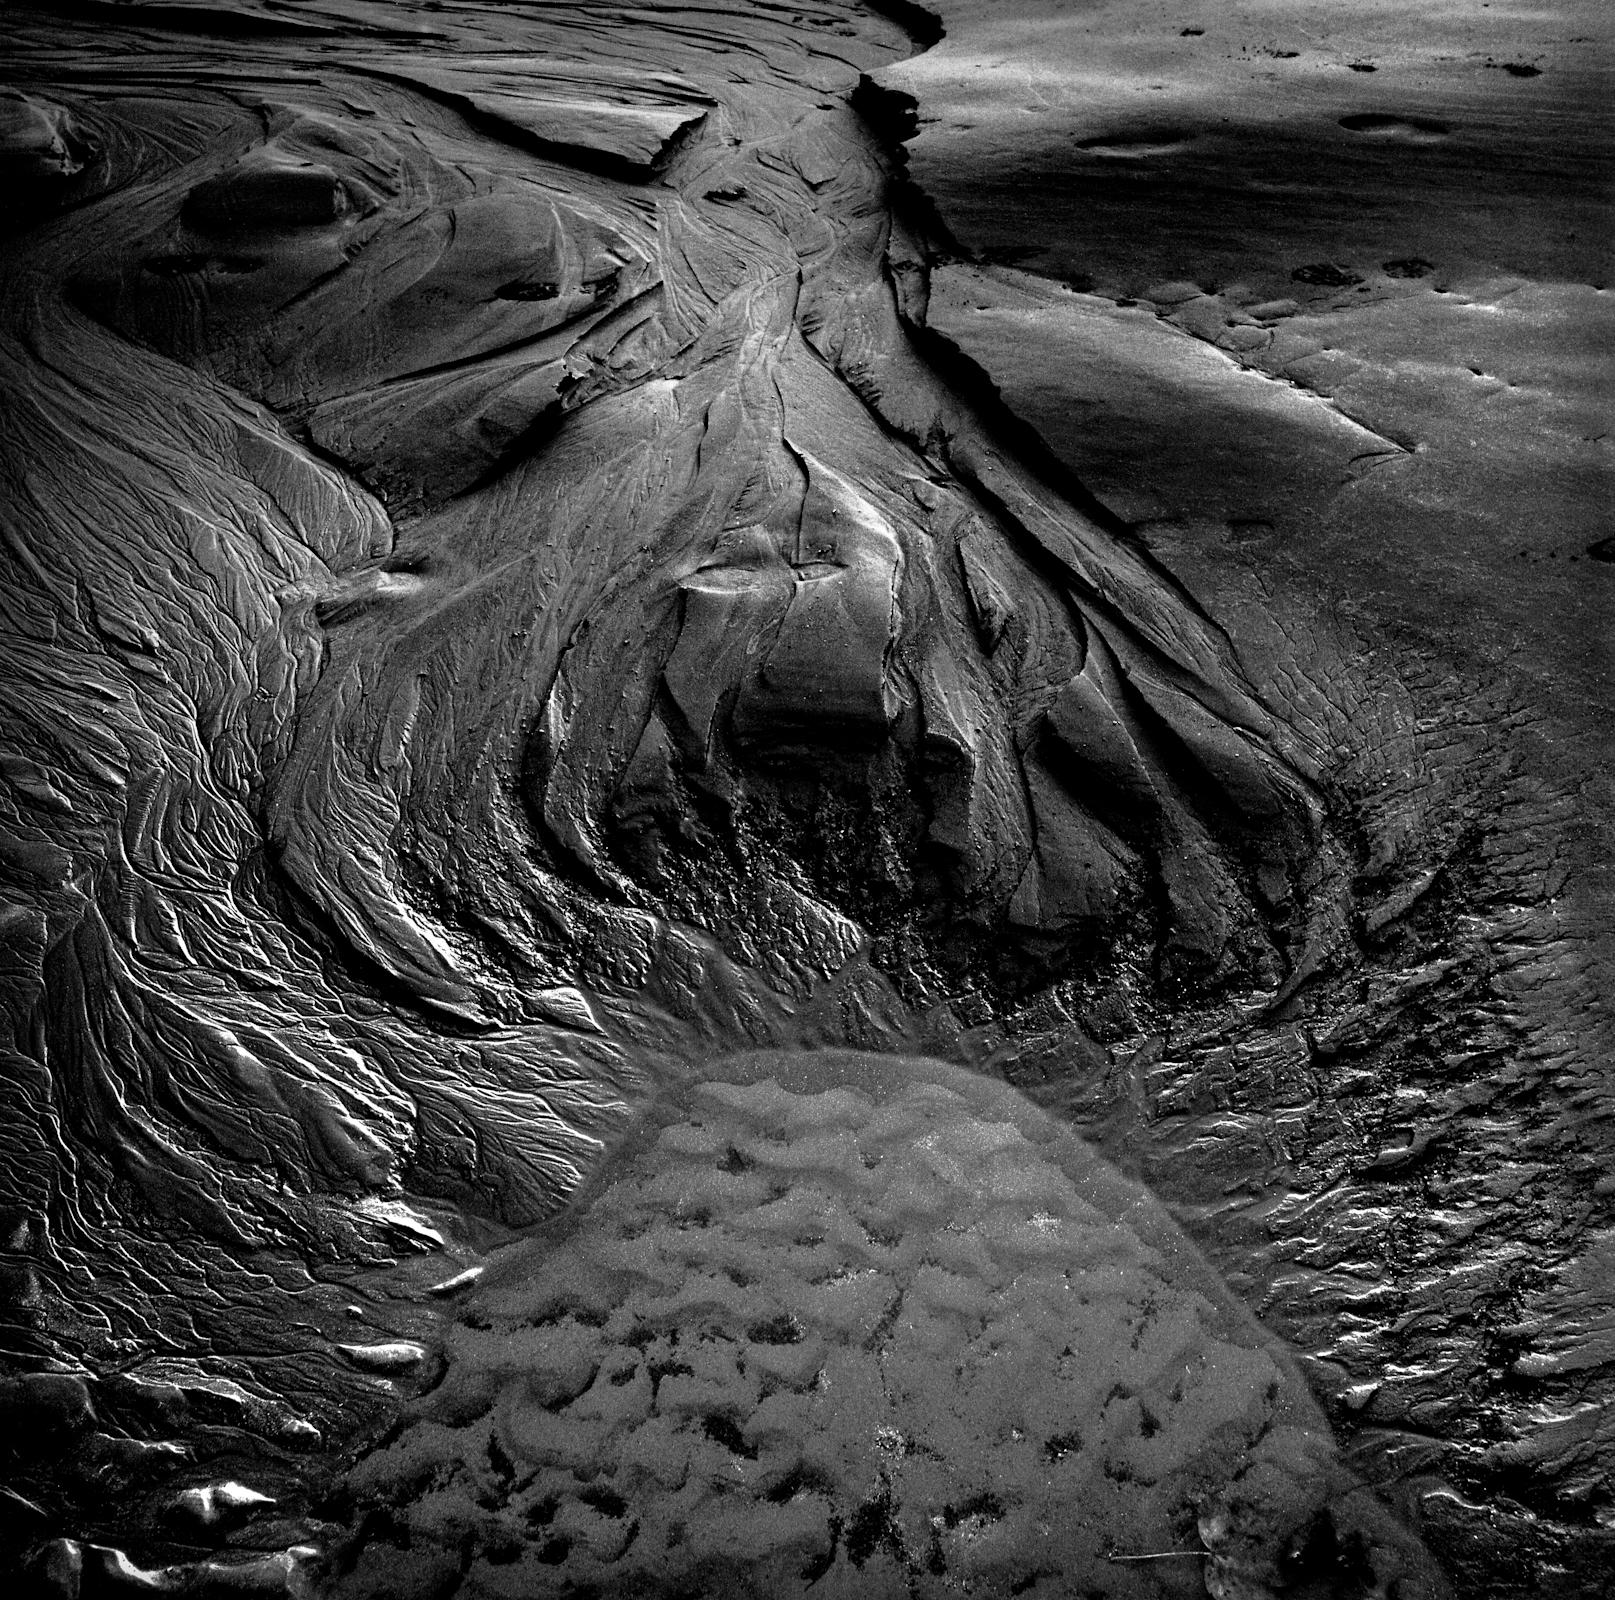 Michael G Jackson Black and White Photograph – Poppit Sands #19, Wales, Wales  